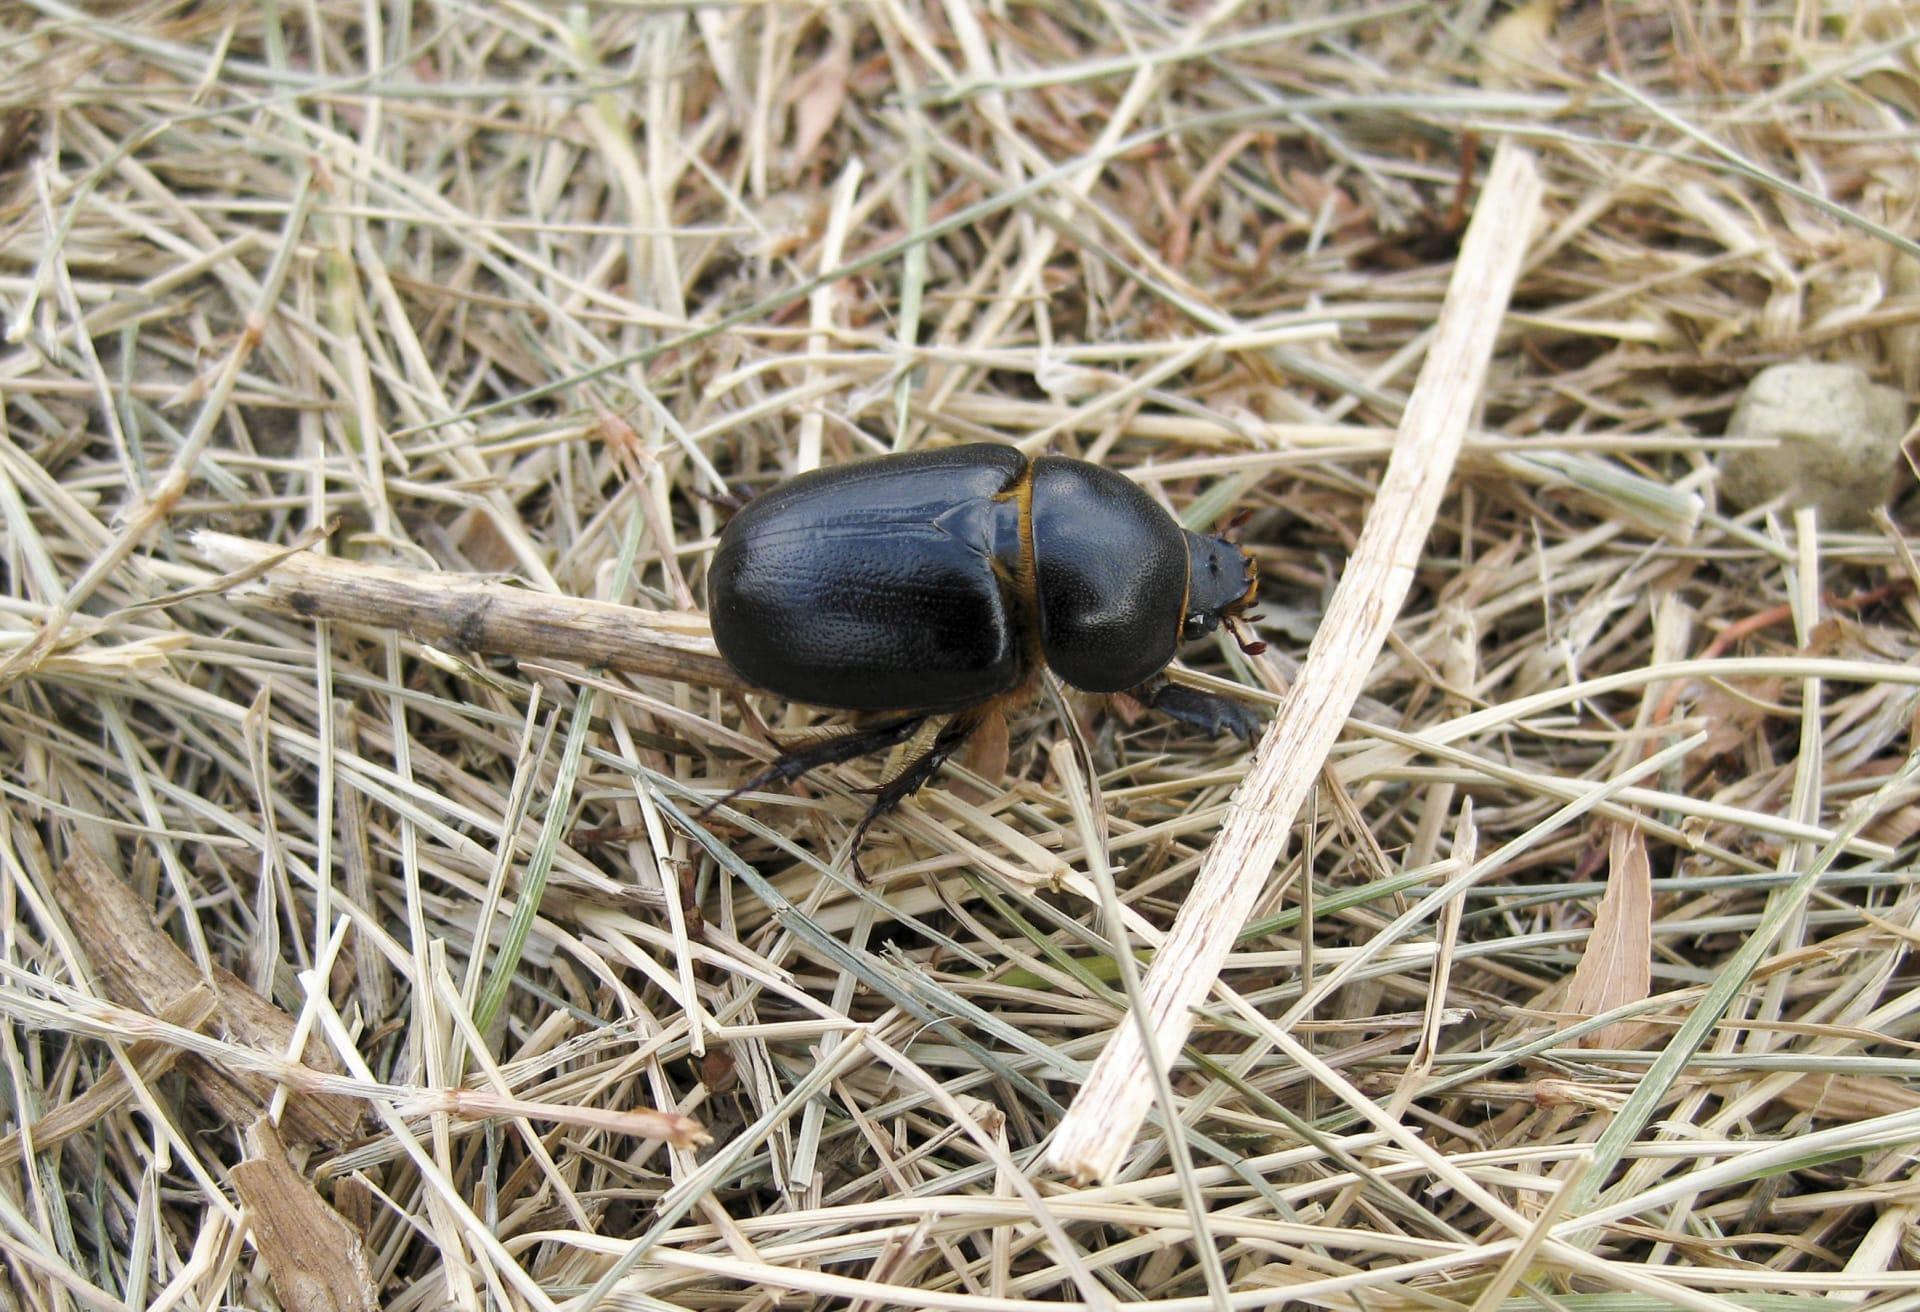 Dung beetle pictures